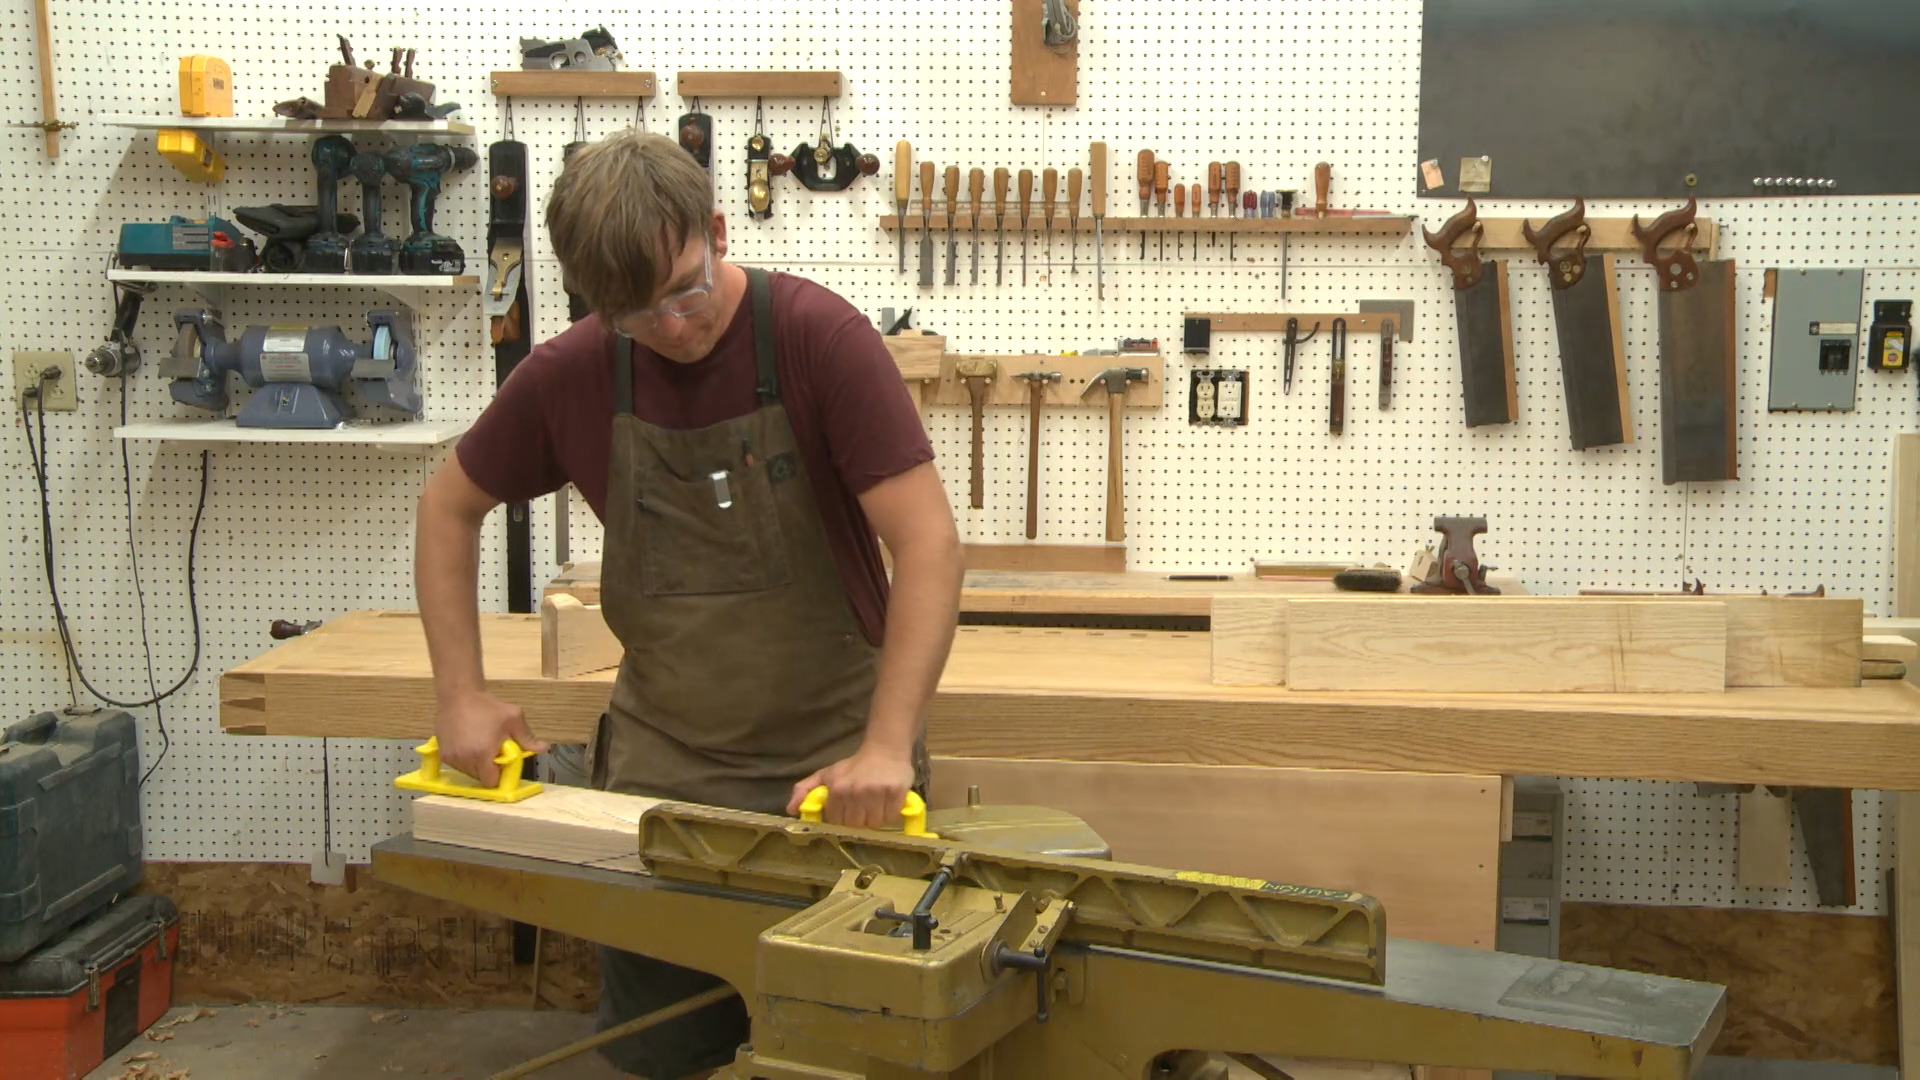 Session 5: Using the Jointer